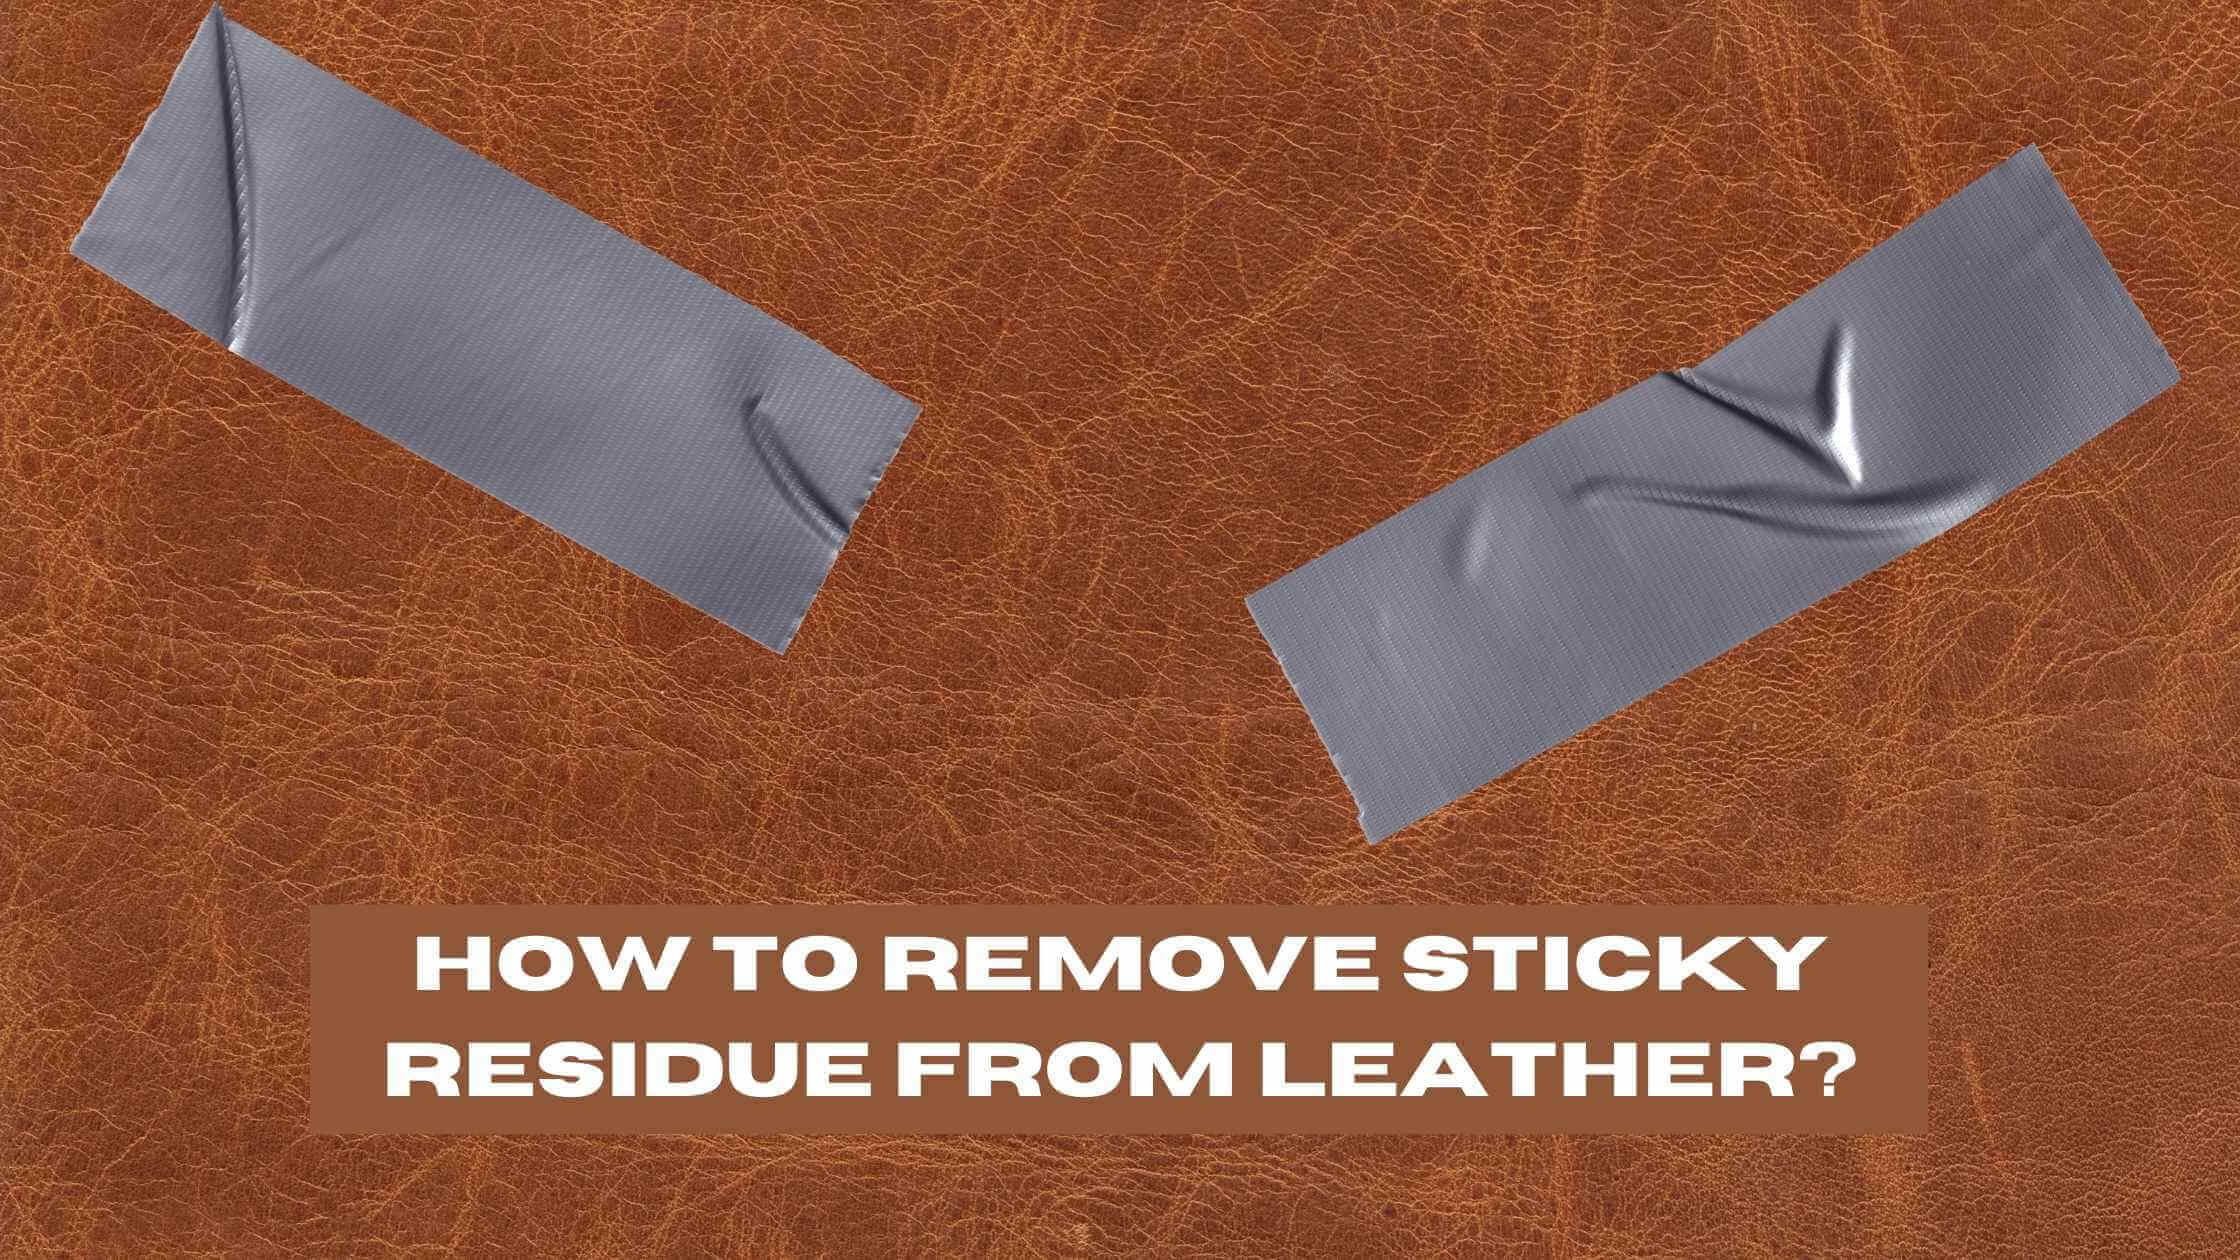 How to Remove Sticky Residue from Leather